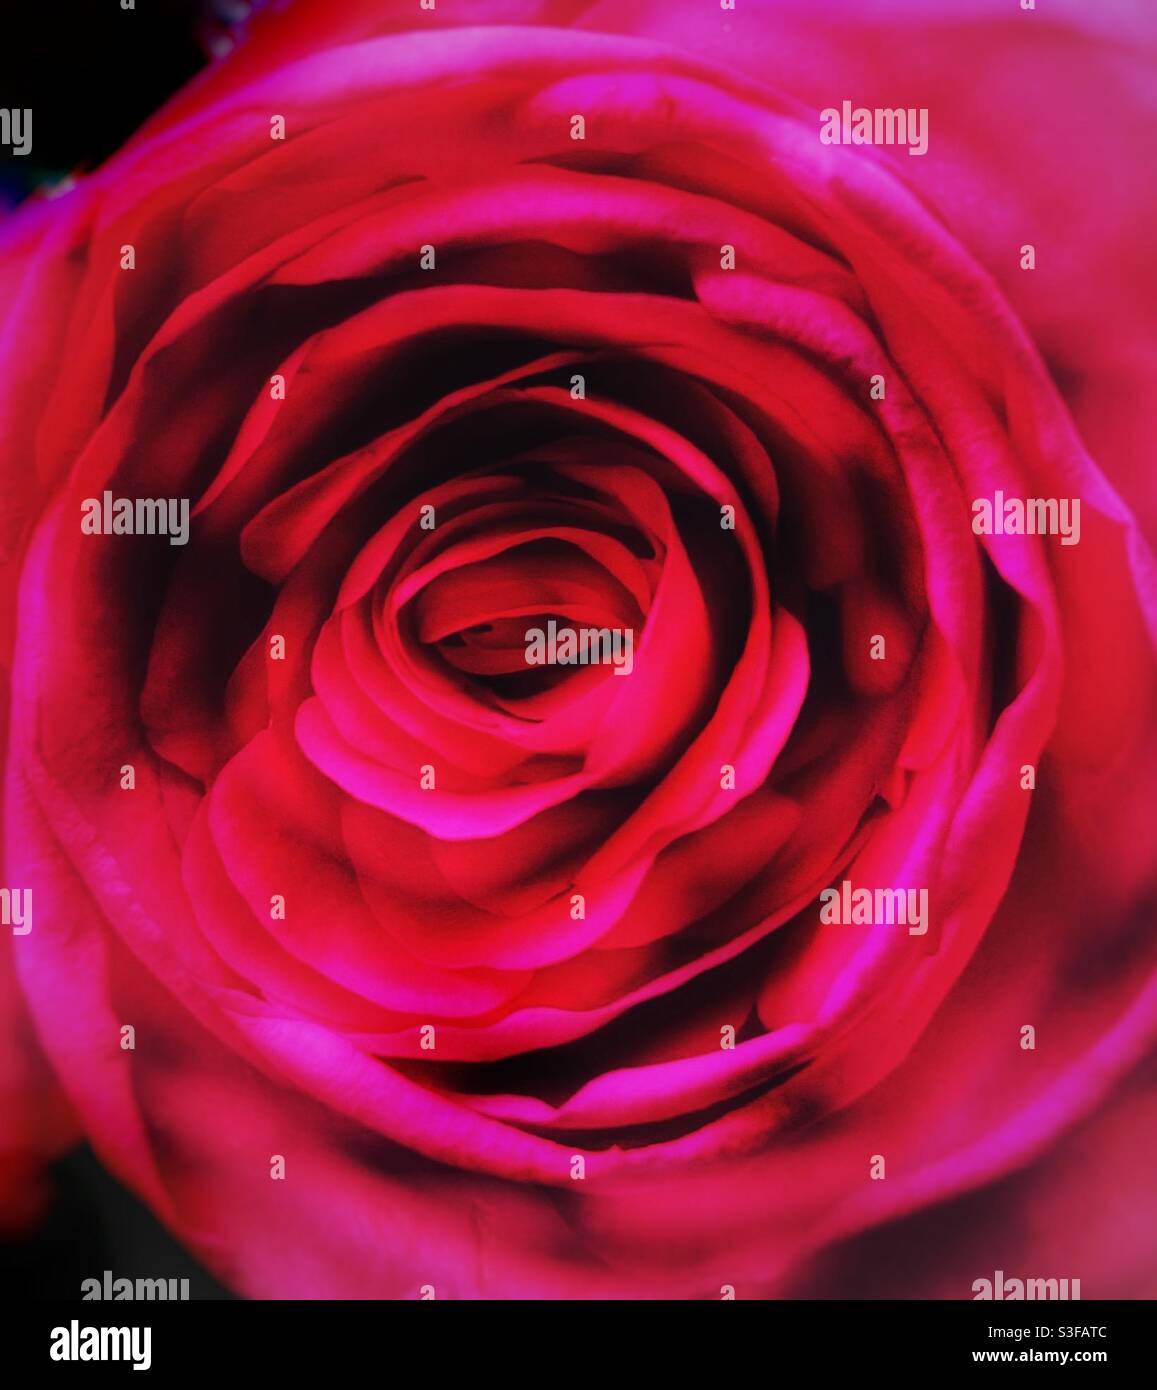 Red rose abstract Stock Photo